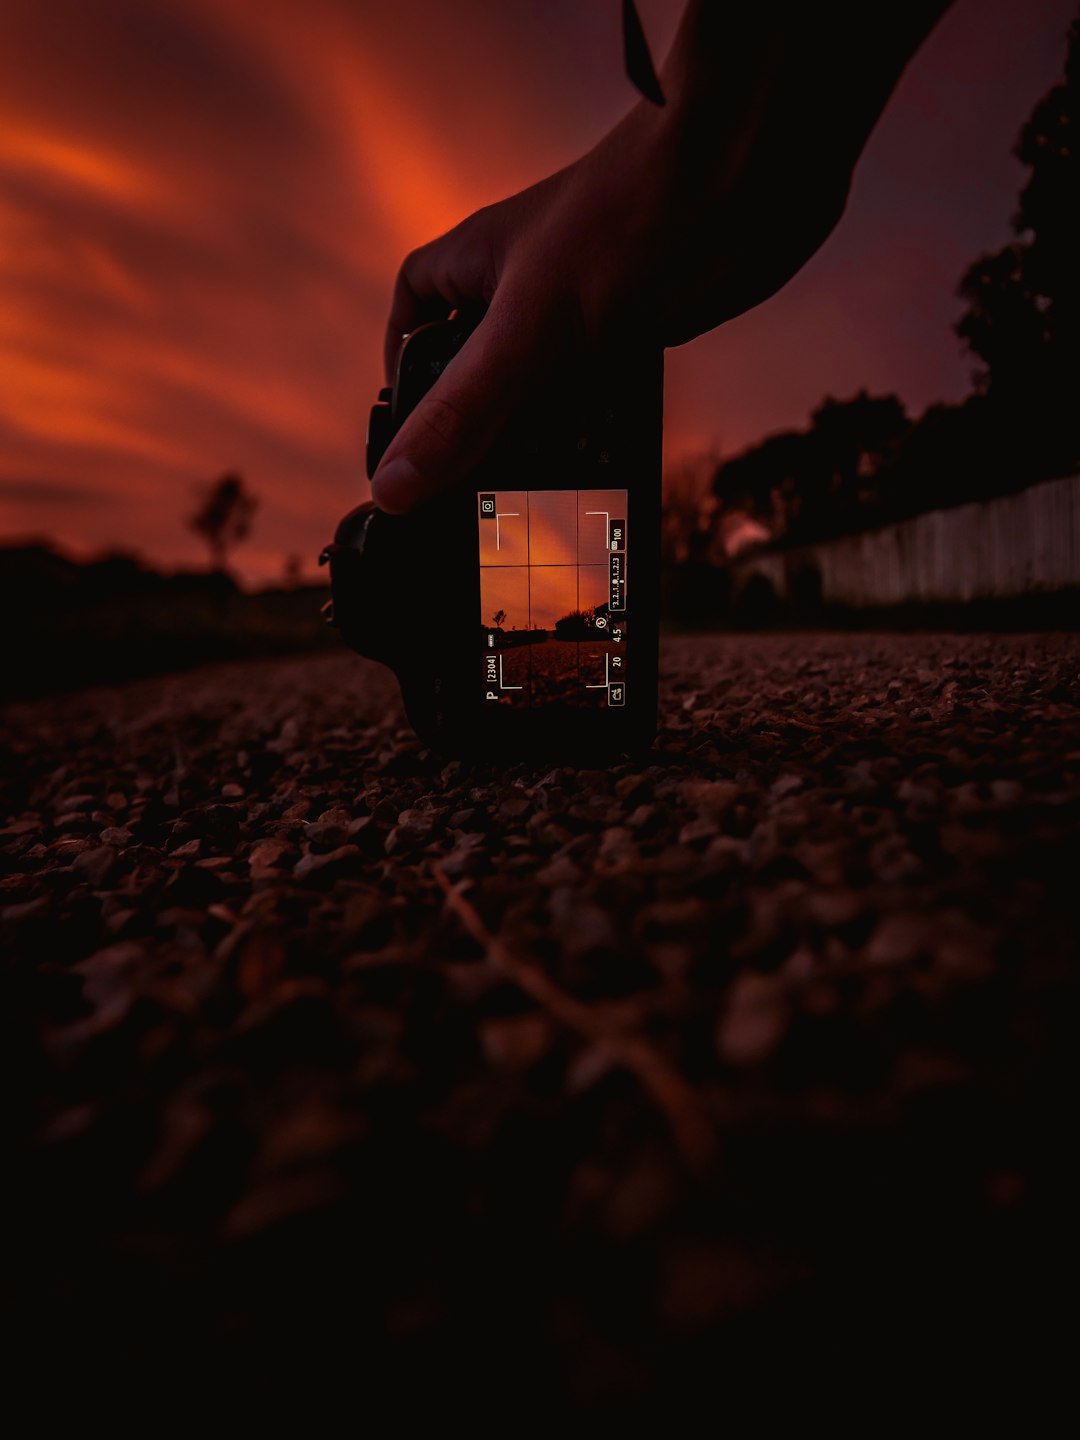 person holding black smartphone during sunset